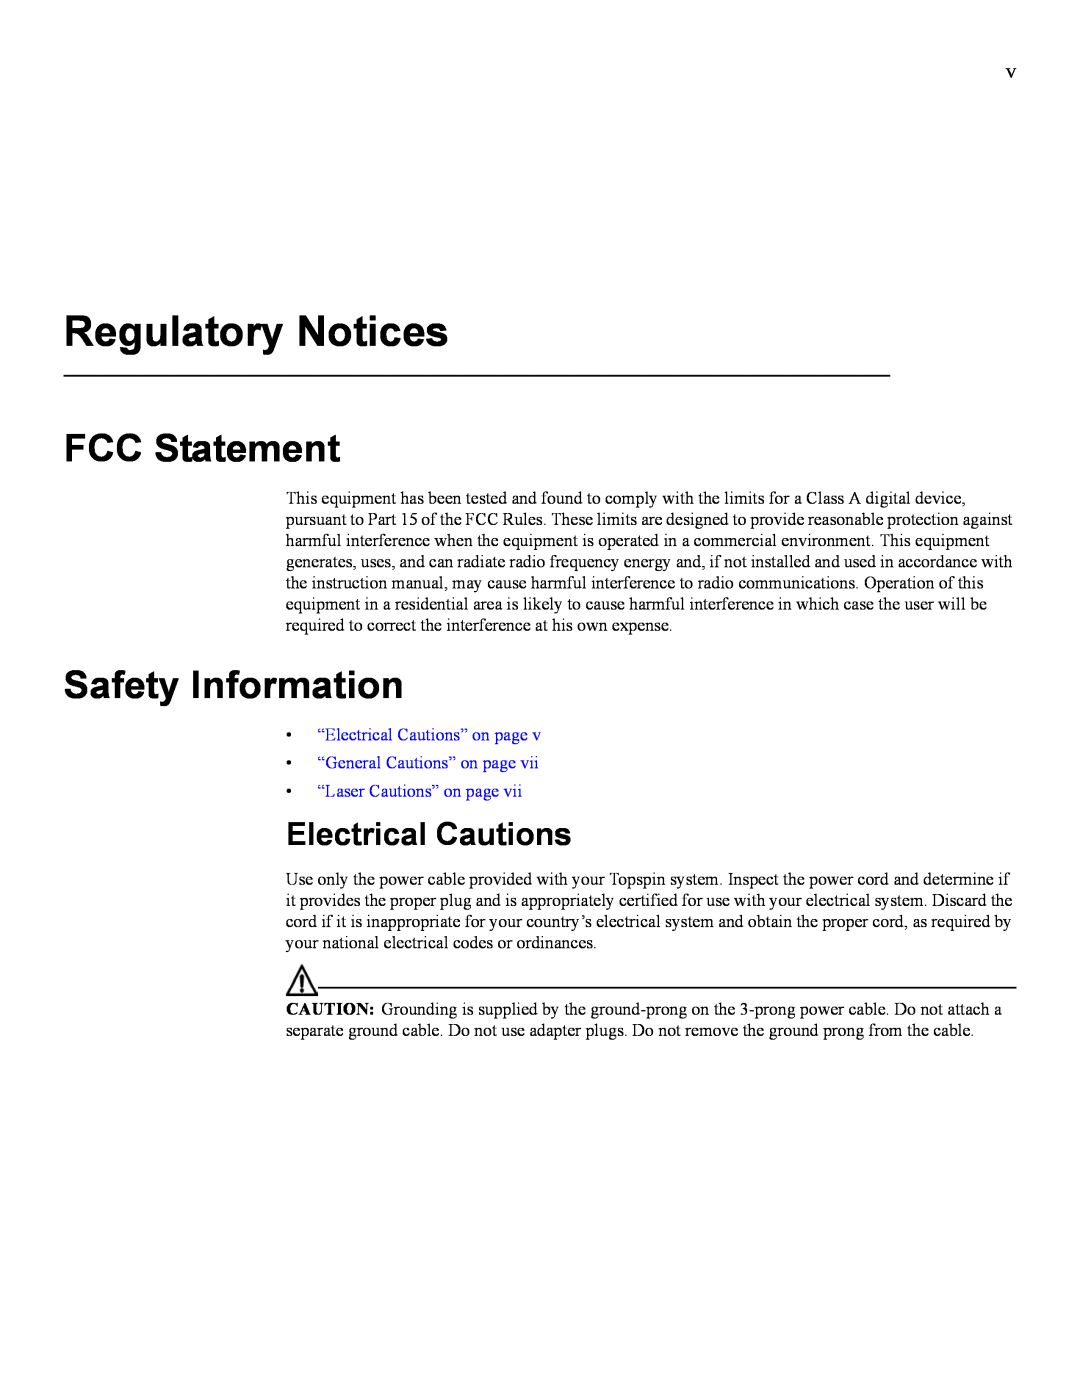 Cisco Systems SFS 3012 quick start Regulatory Notices, FCC Statement, Safety Information, Electrical Cautions 